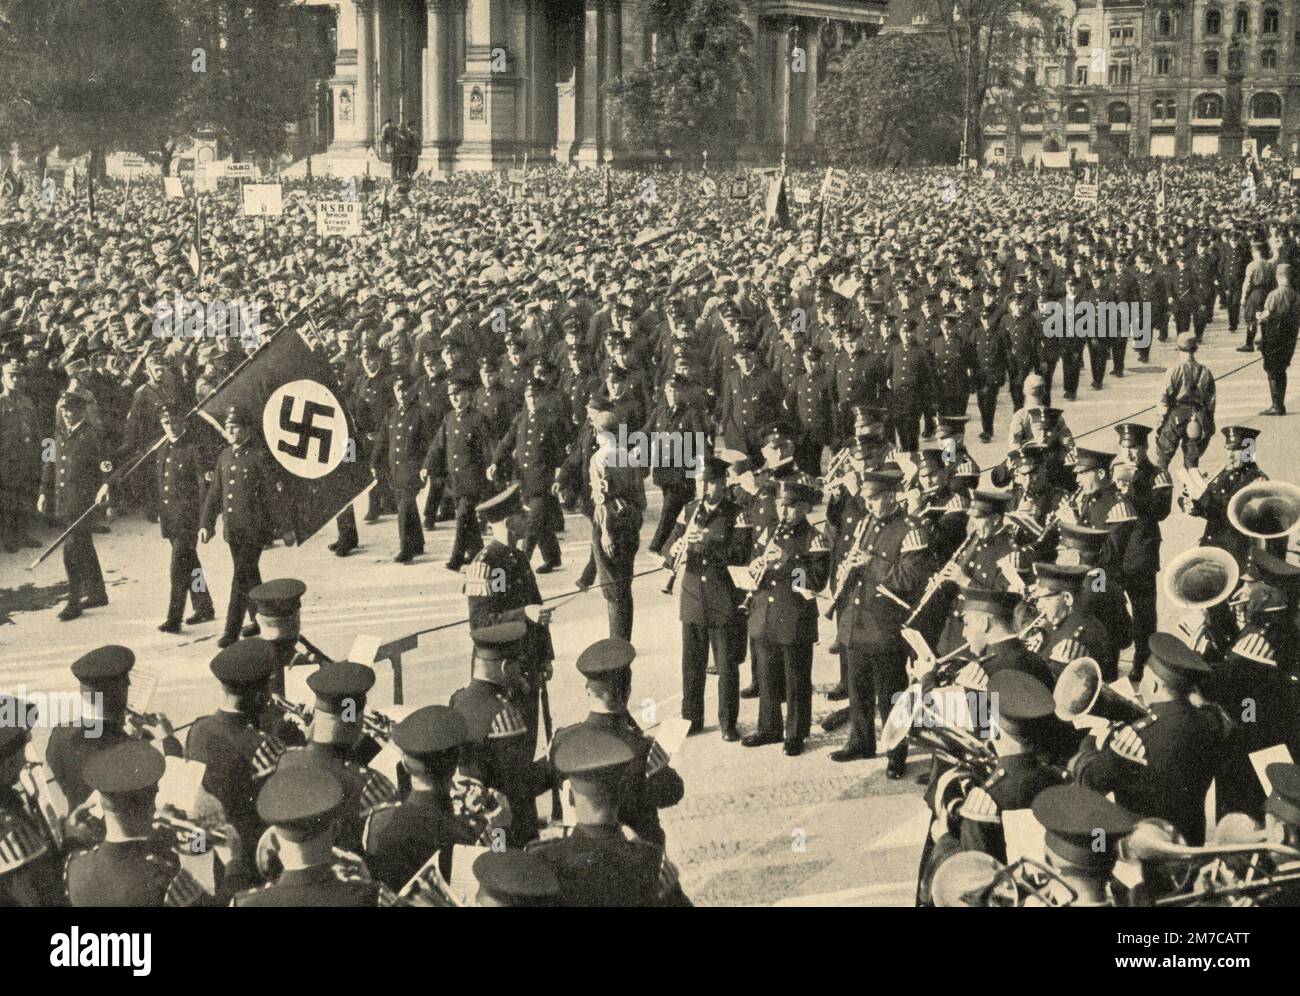 Nazi National Socialist Factory Cell Organization gathering in Berlin, Germany 1930s Stock Photo